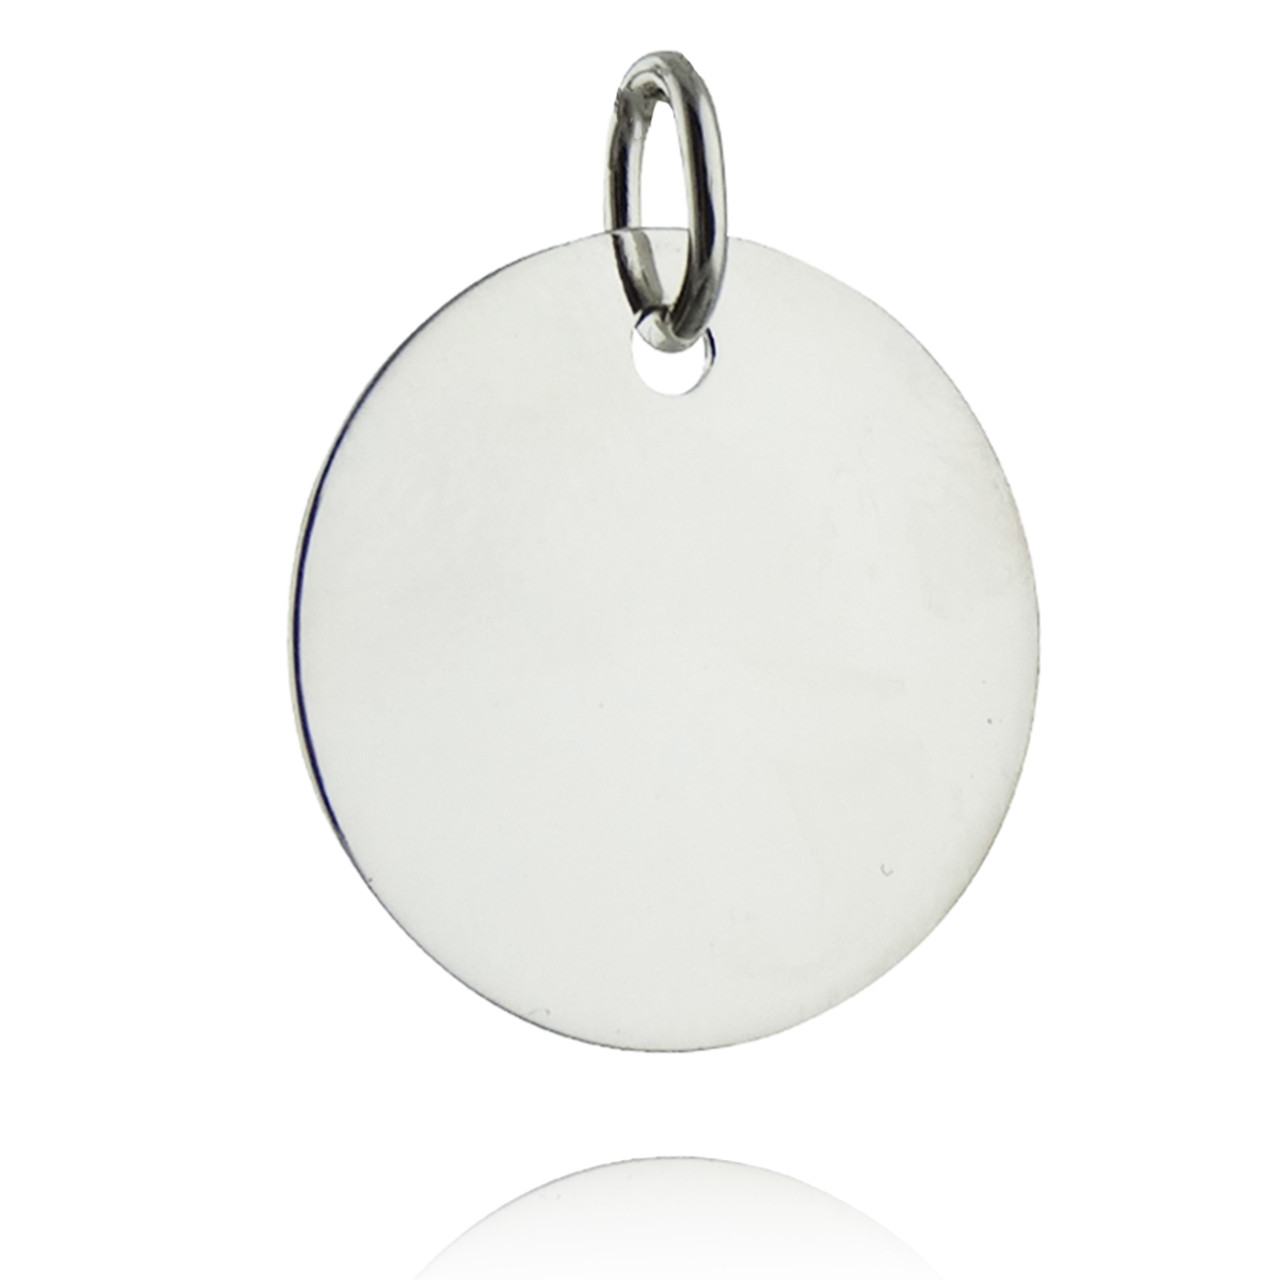 .925 Sterling Silver Engravable Round with Rope Disc Charm Pendant 